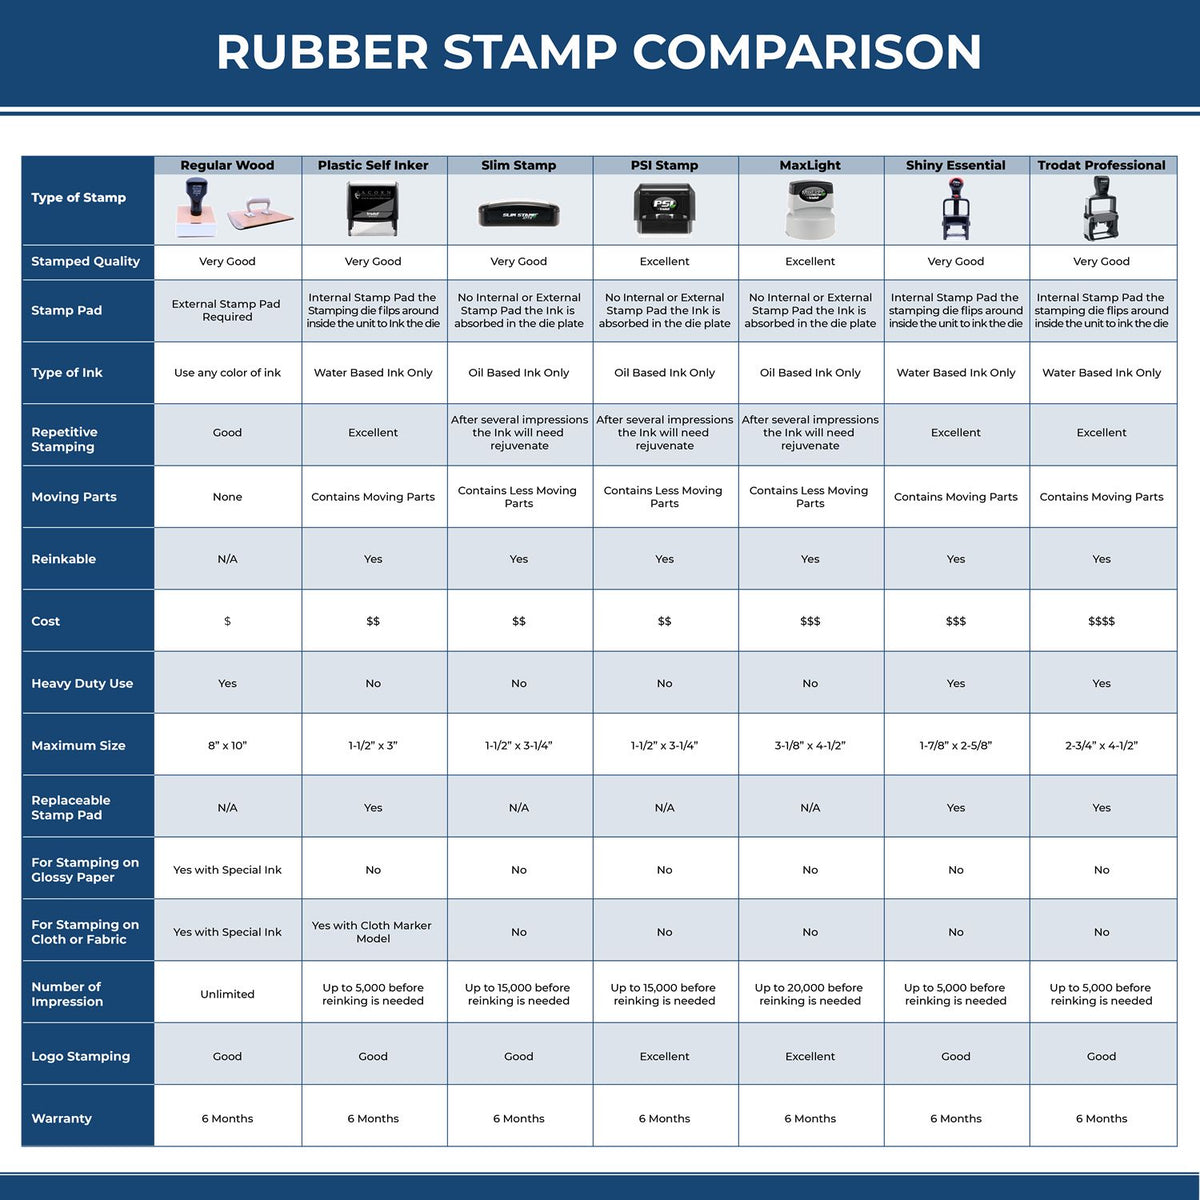 A comparison chart for the different types of mount models available for the Self-Inking Rectangular Pennsylvania Notary Stamp.